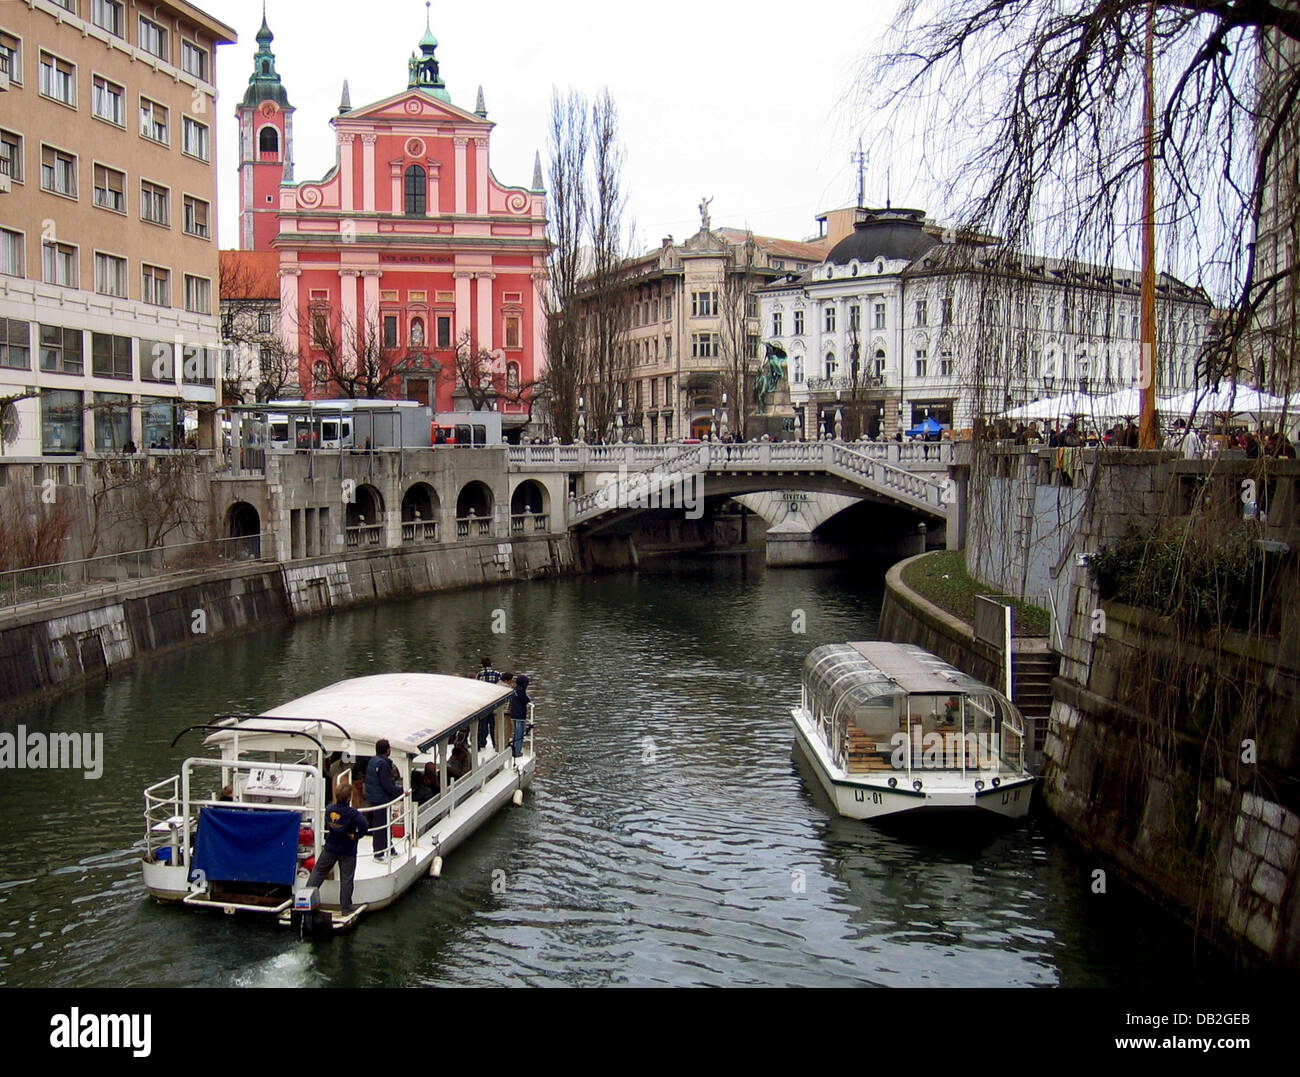 FILE - A view of river Ljubliancia and the Franciscan Church shown in the capital city Ljubljana, Slovenia, 27 March 2005. Slovenia will be the first of the twelve new member states who have joined the European Union on 01 May 2004 to assume the Presidency of the EU Council at the turn of the year. With a population of two million, Slovenia is the fifth smallest EU member state. Ph Stock Photo